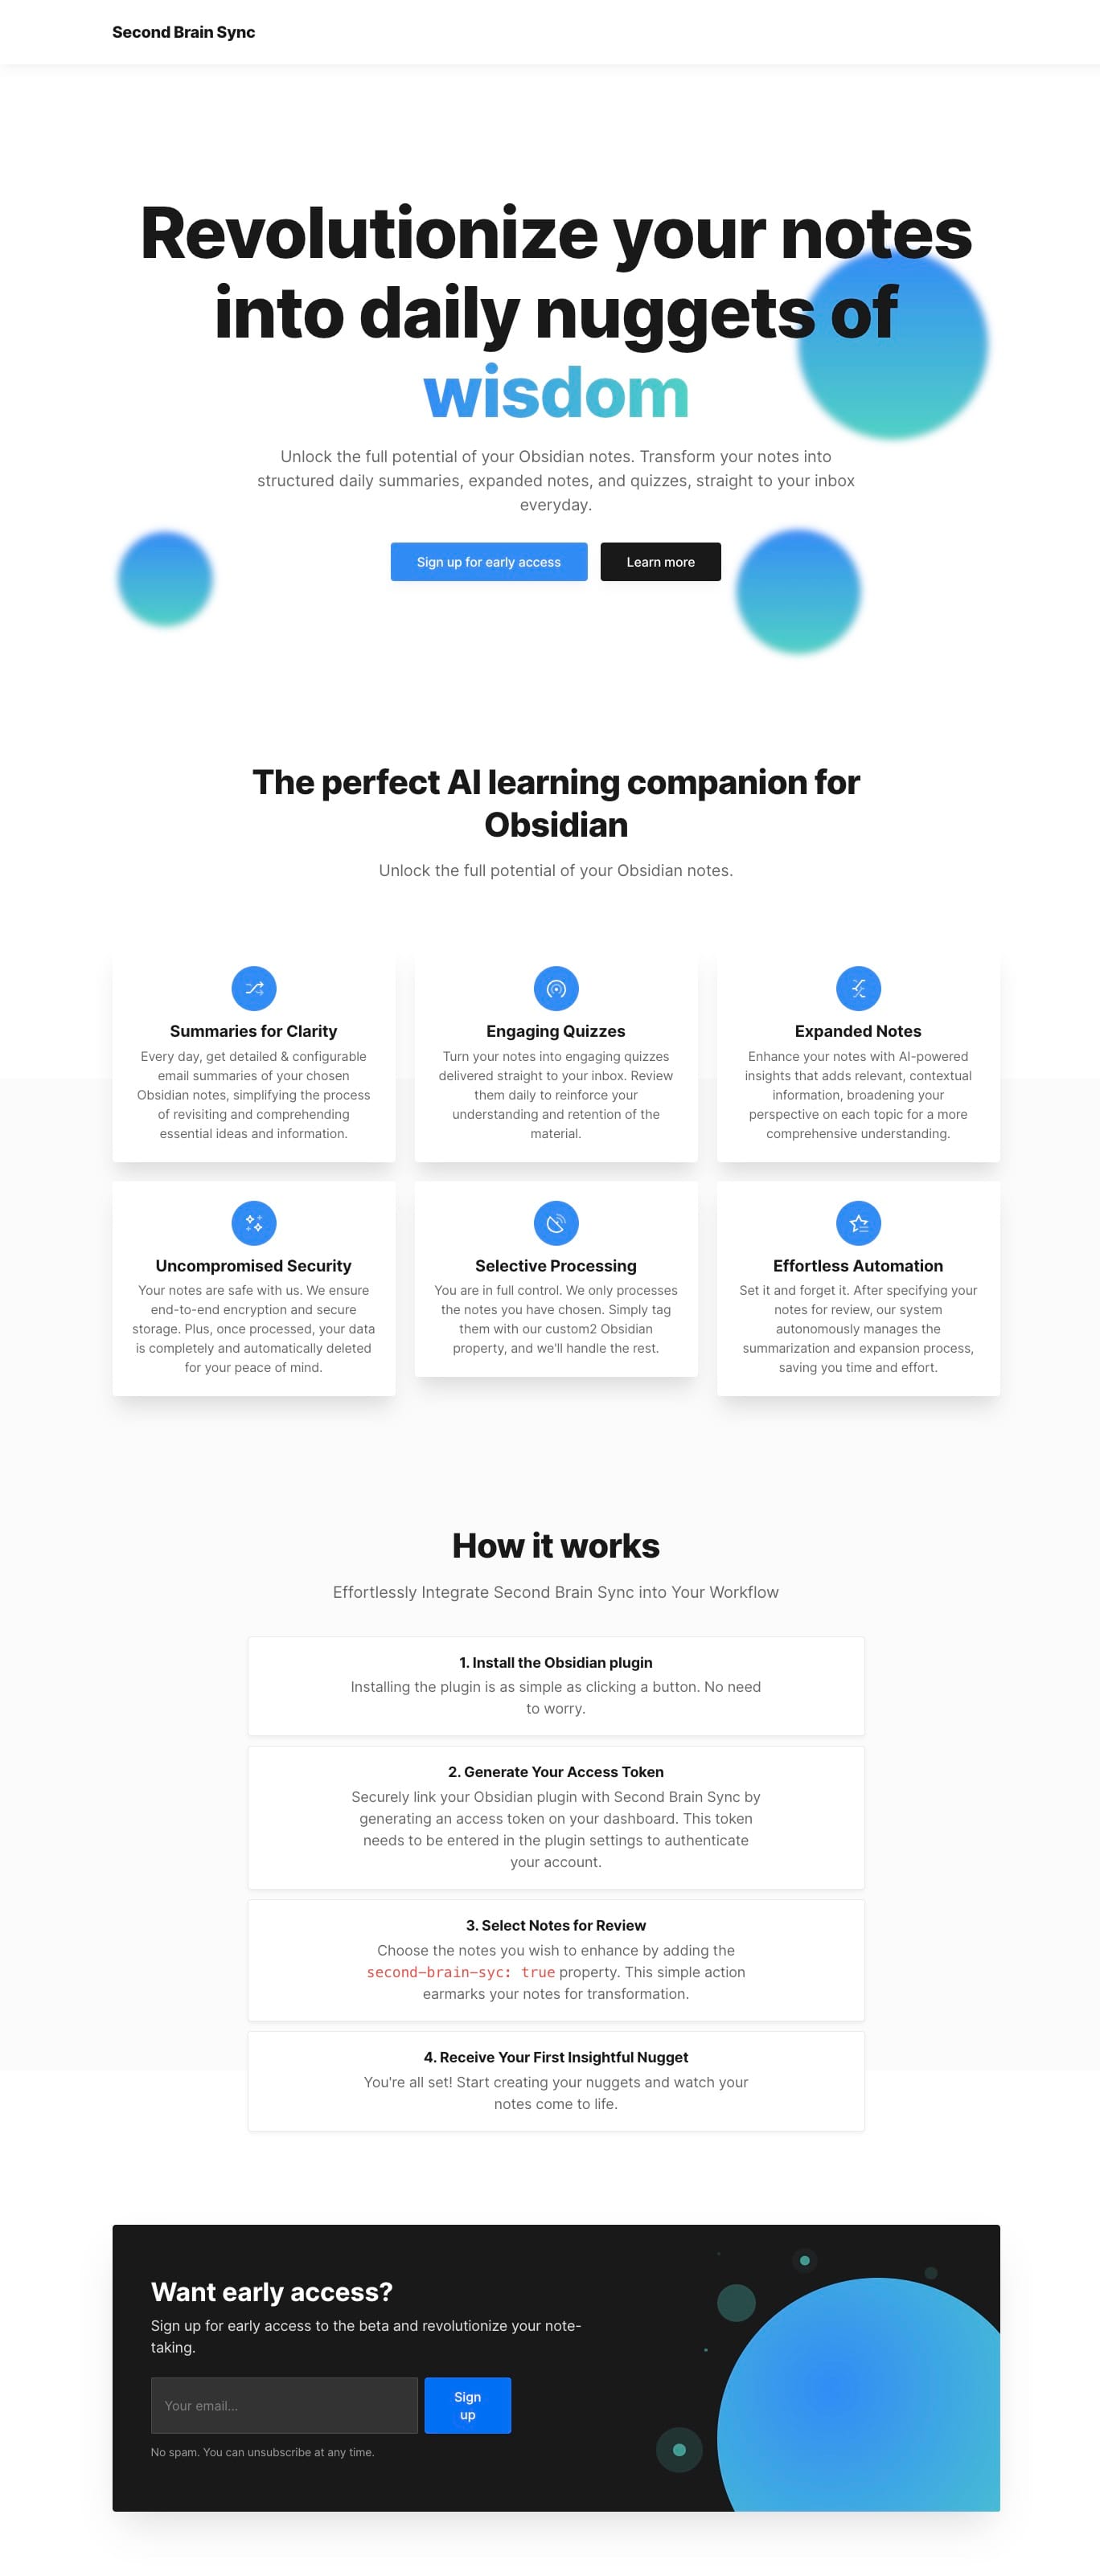 10 Beautiful SaaS Landing Pages Without Product Images